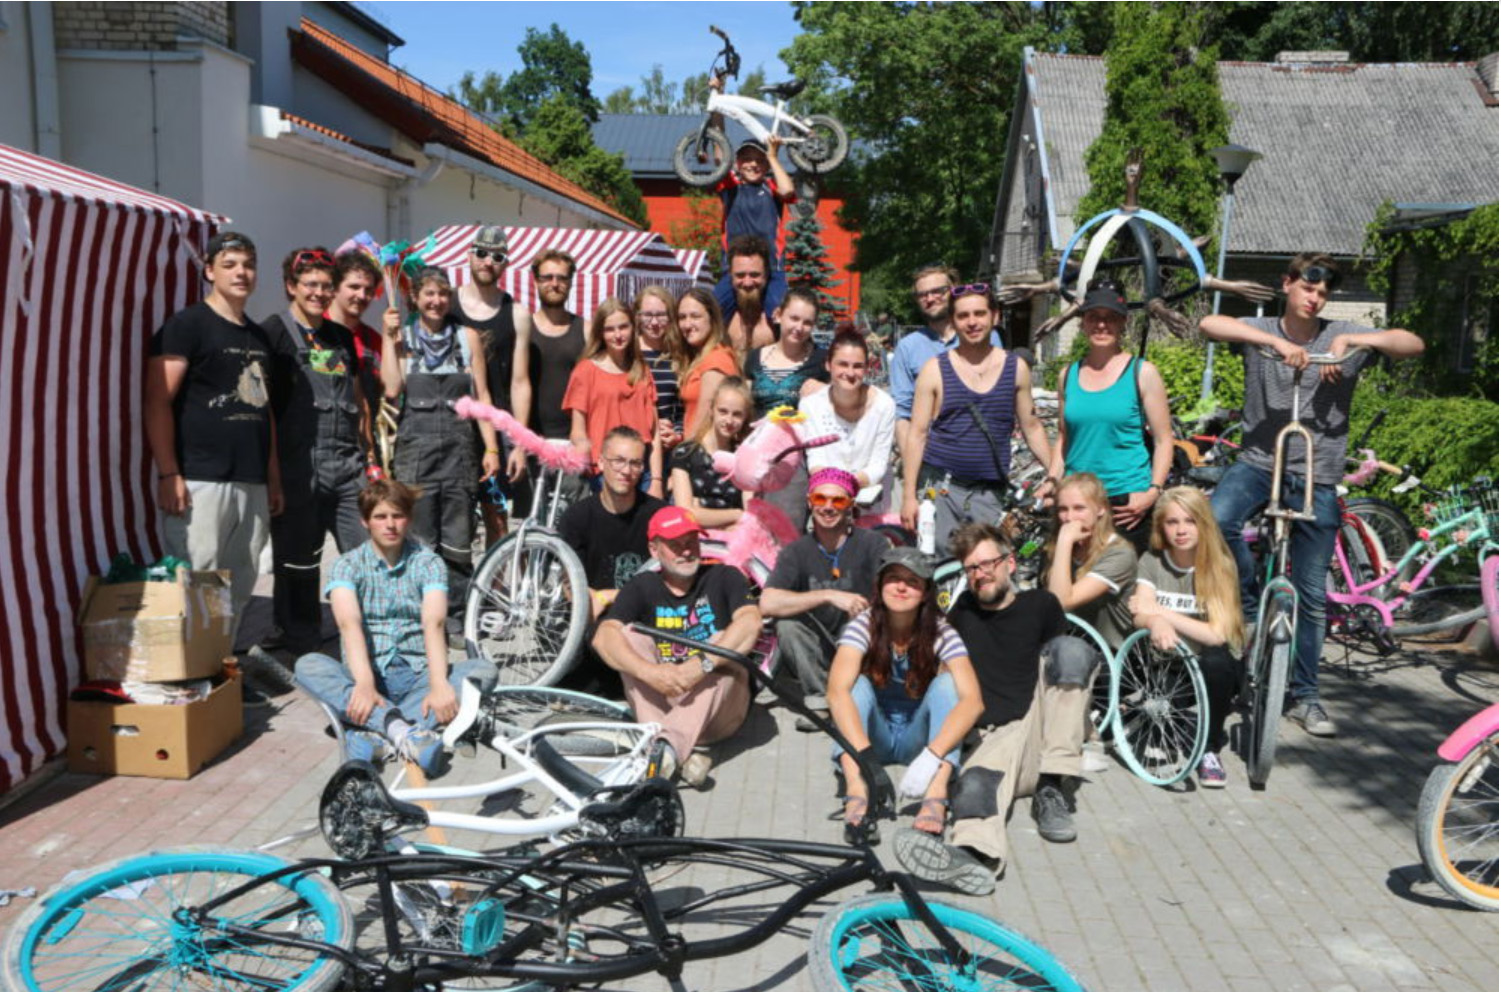 the cast of Design Squad with members of SCUL pose at the Design Squa HQ parking lot